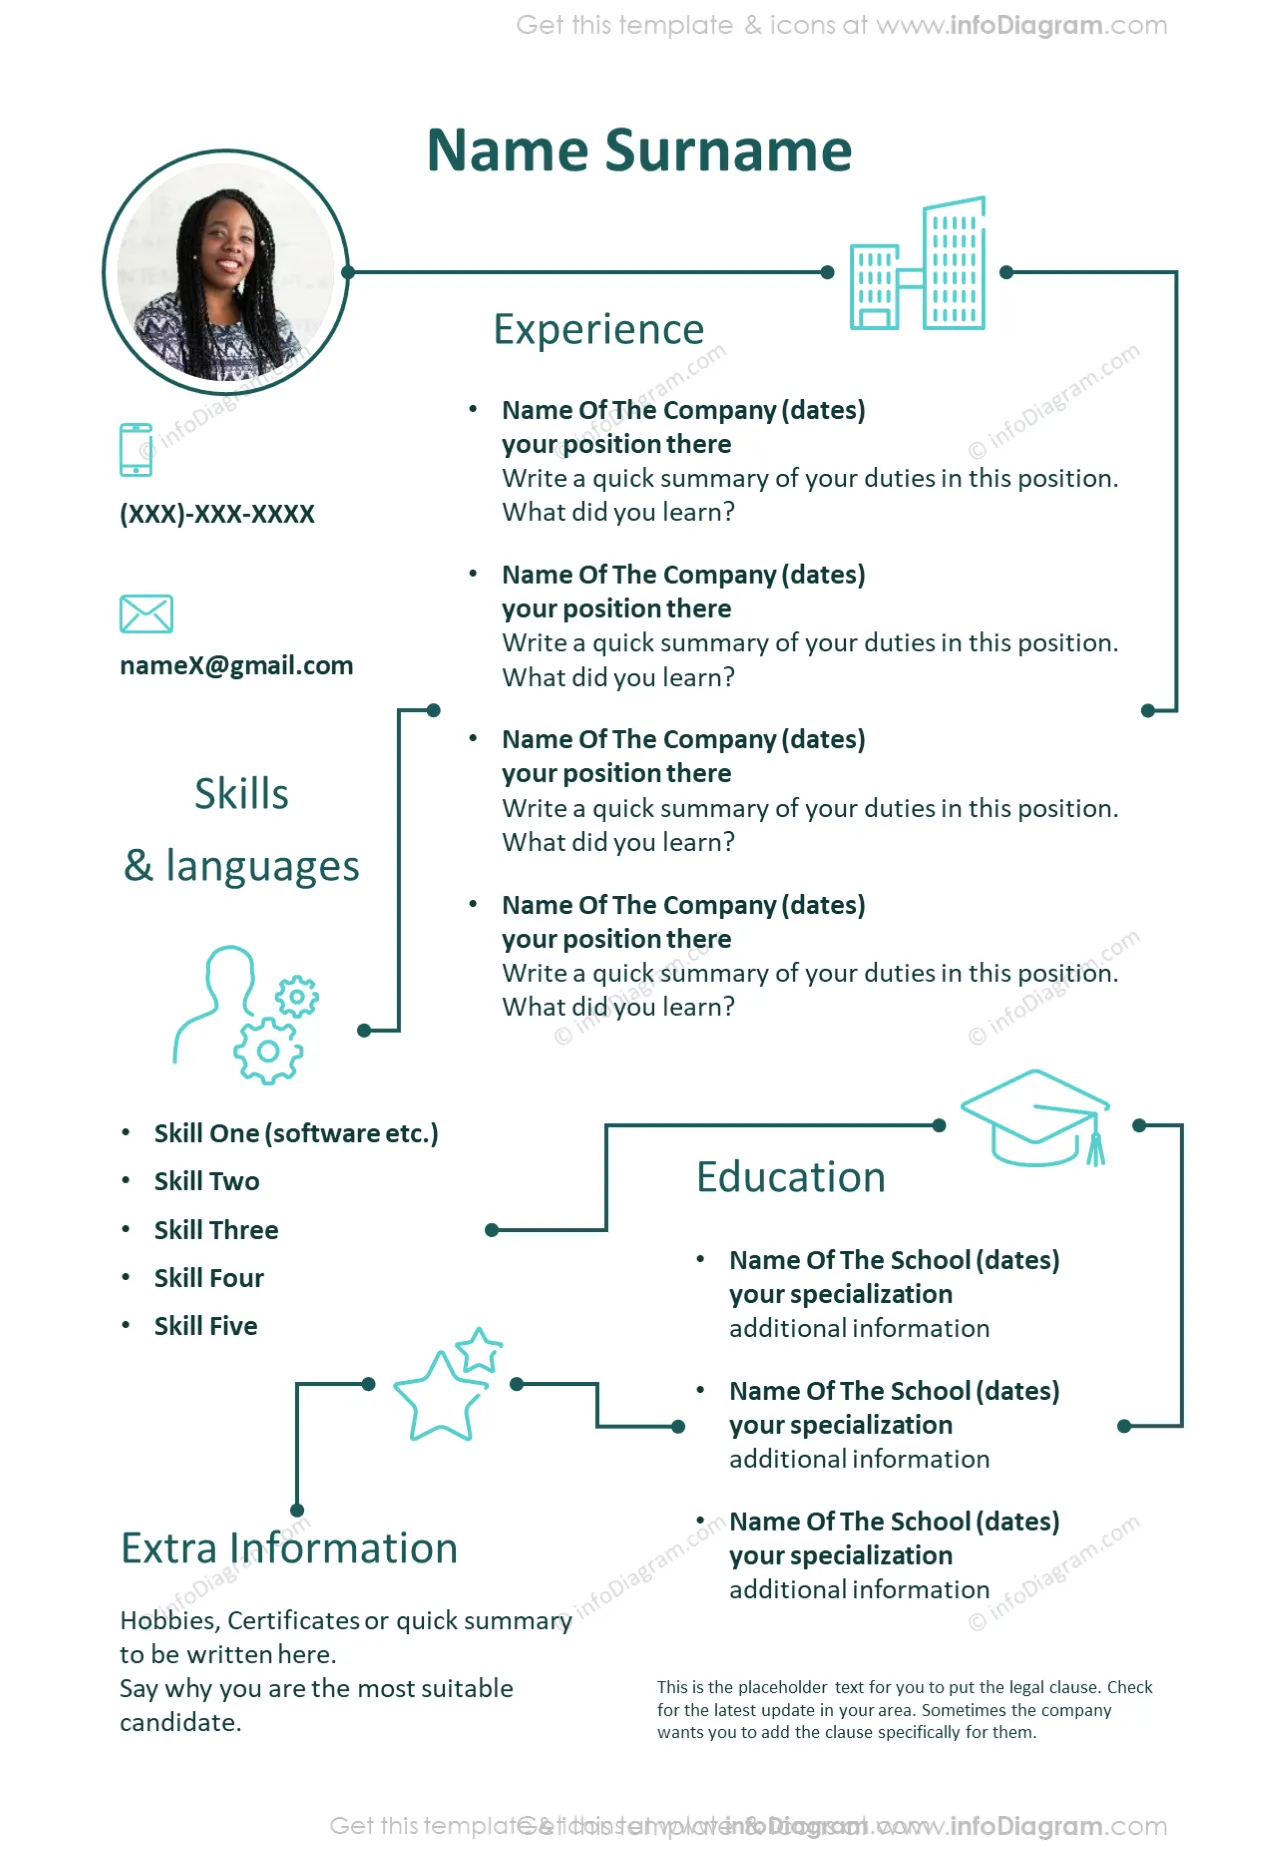 Creative outline personal CV showed with elegant single template